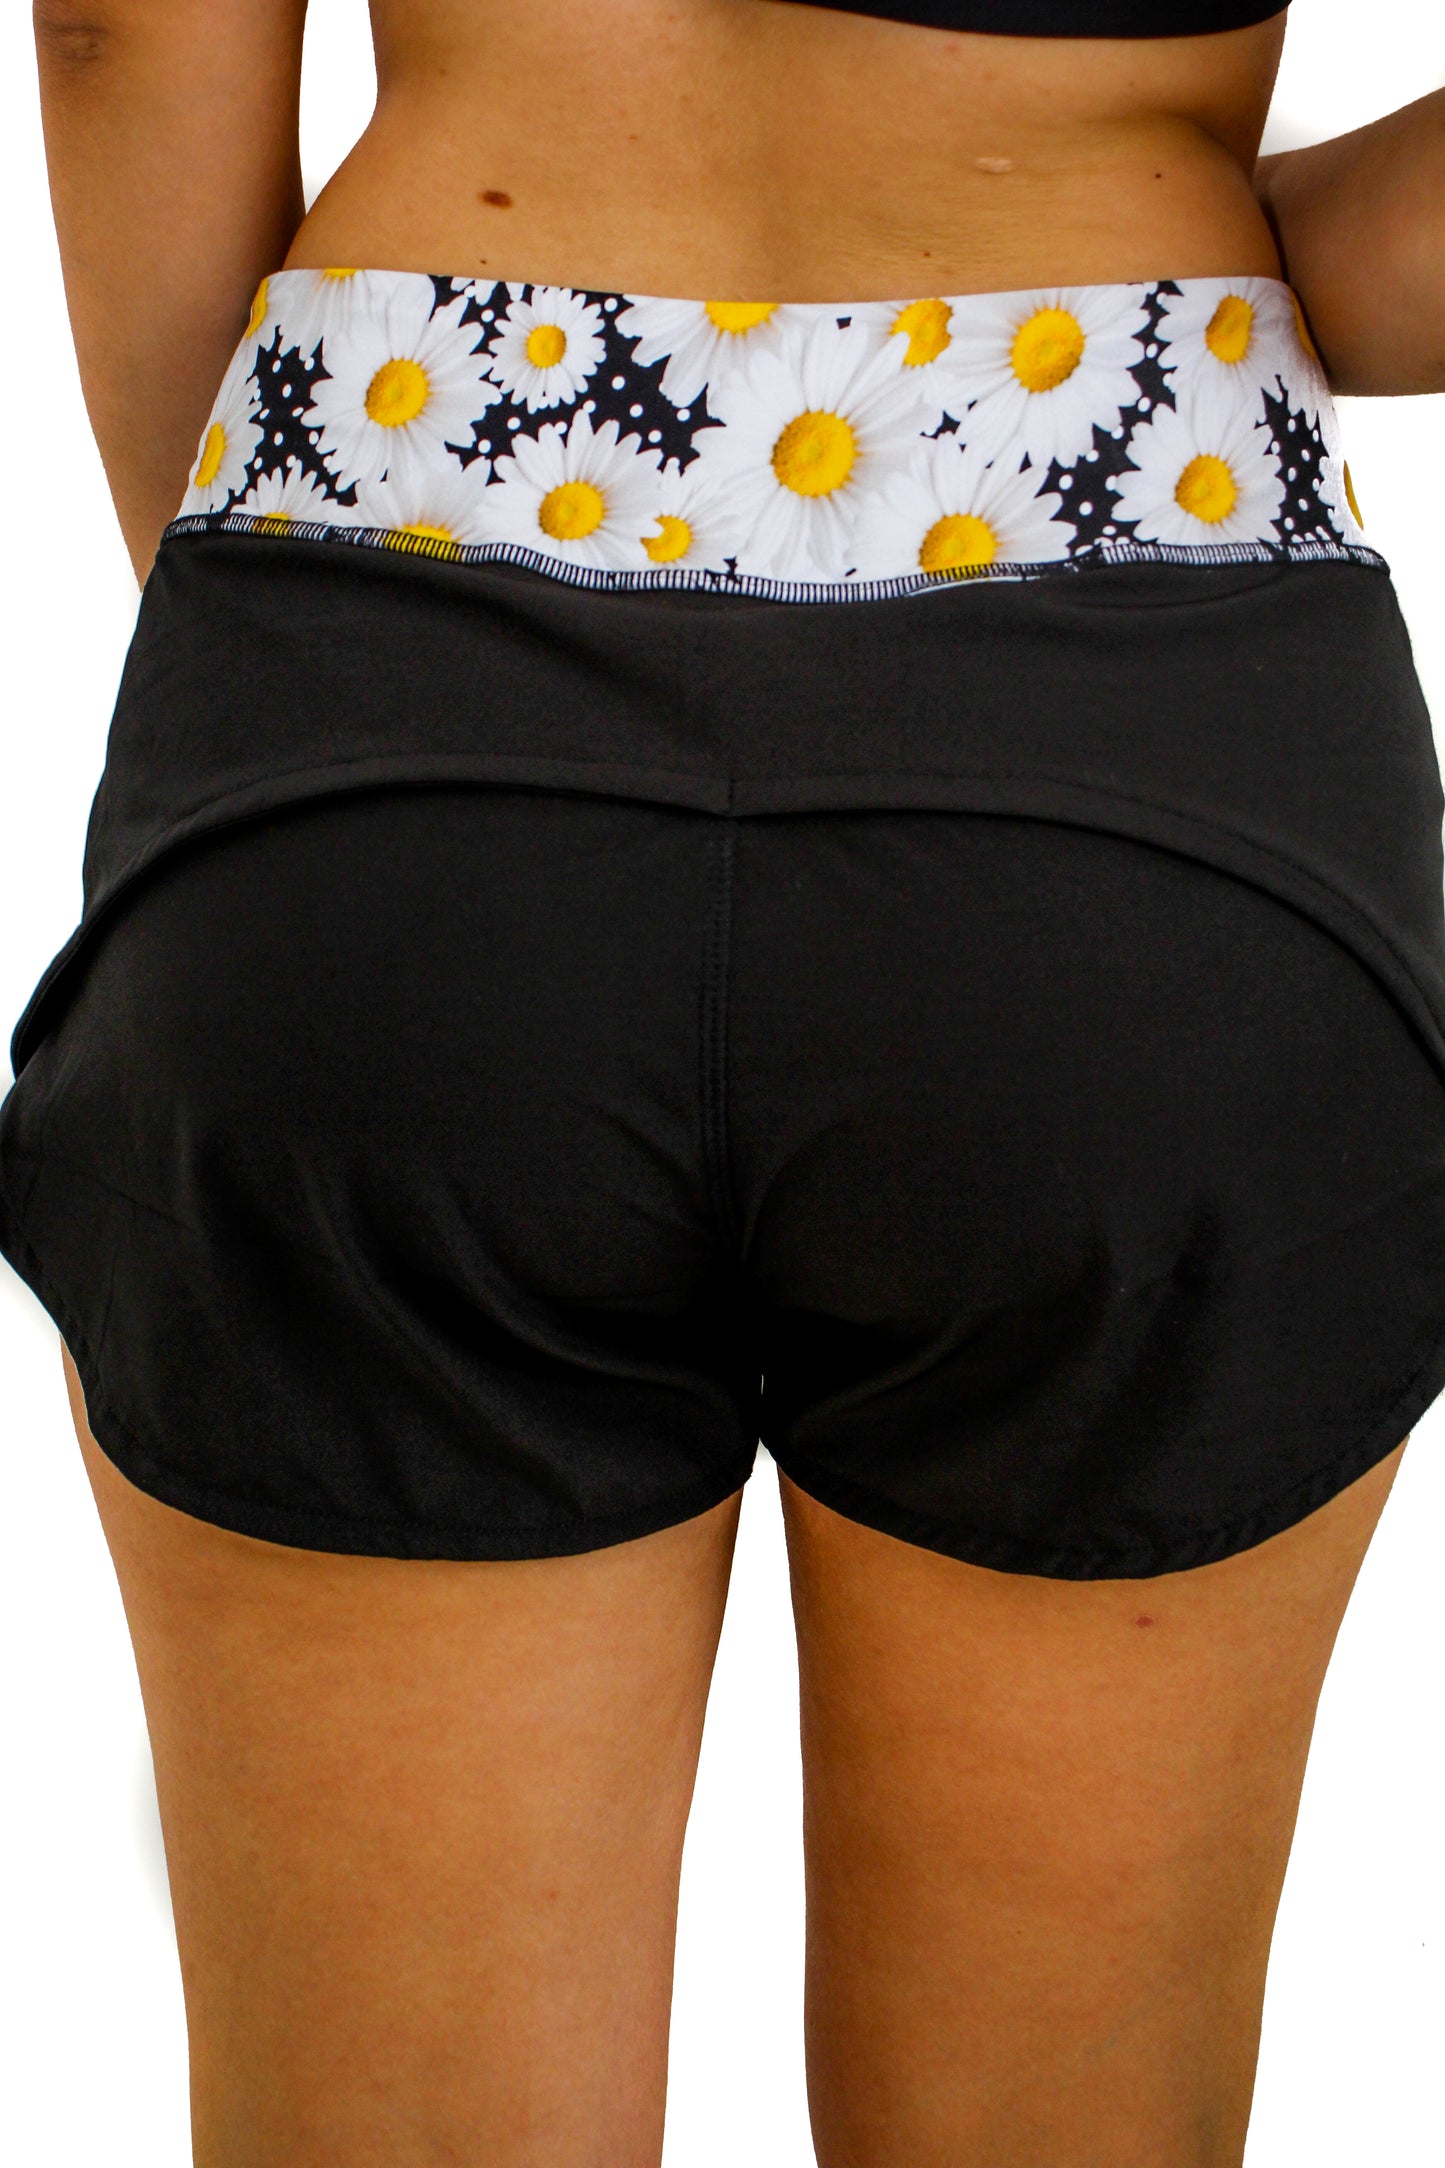 Running Shorts -  Black and Daisy on the waist and underwear with pocket